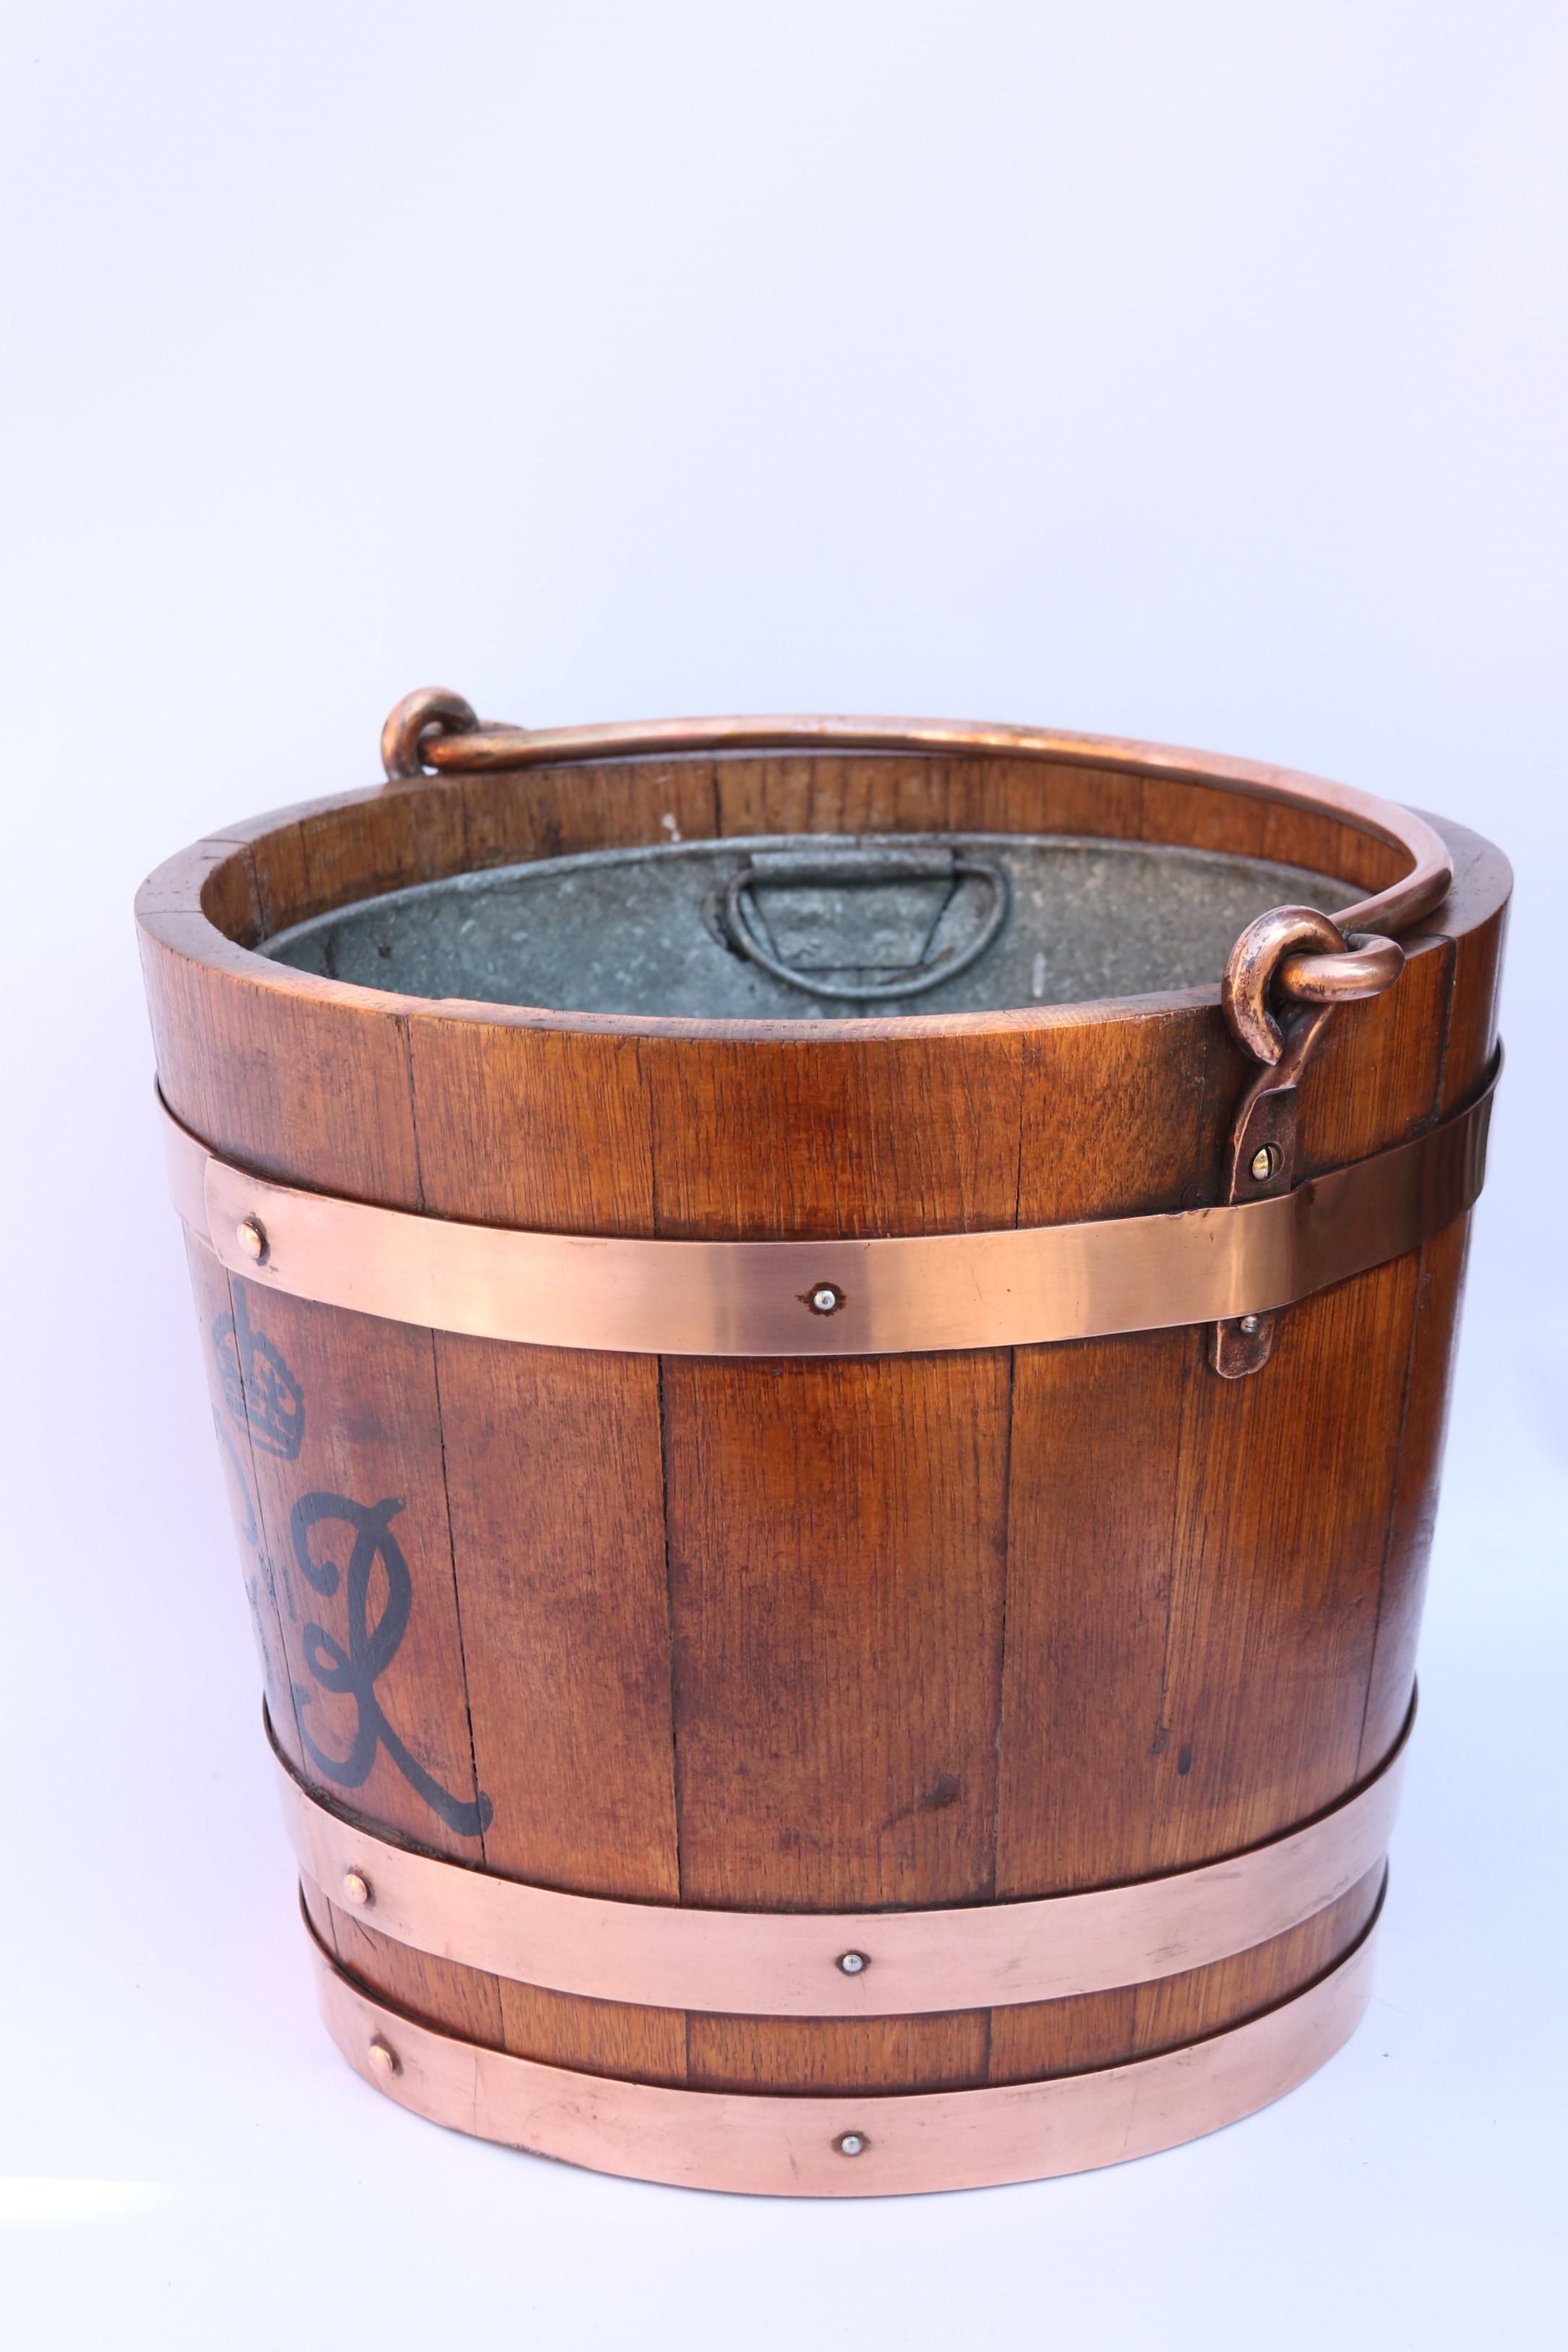 A rare hand coopered English oak bucket traditionally made and bound in copper held in place with rivets and screws.
This bucket was made to commemorate the coronation of George VI in 1936. It is hand painted with his crown and cipher. The bucket